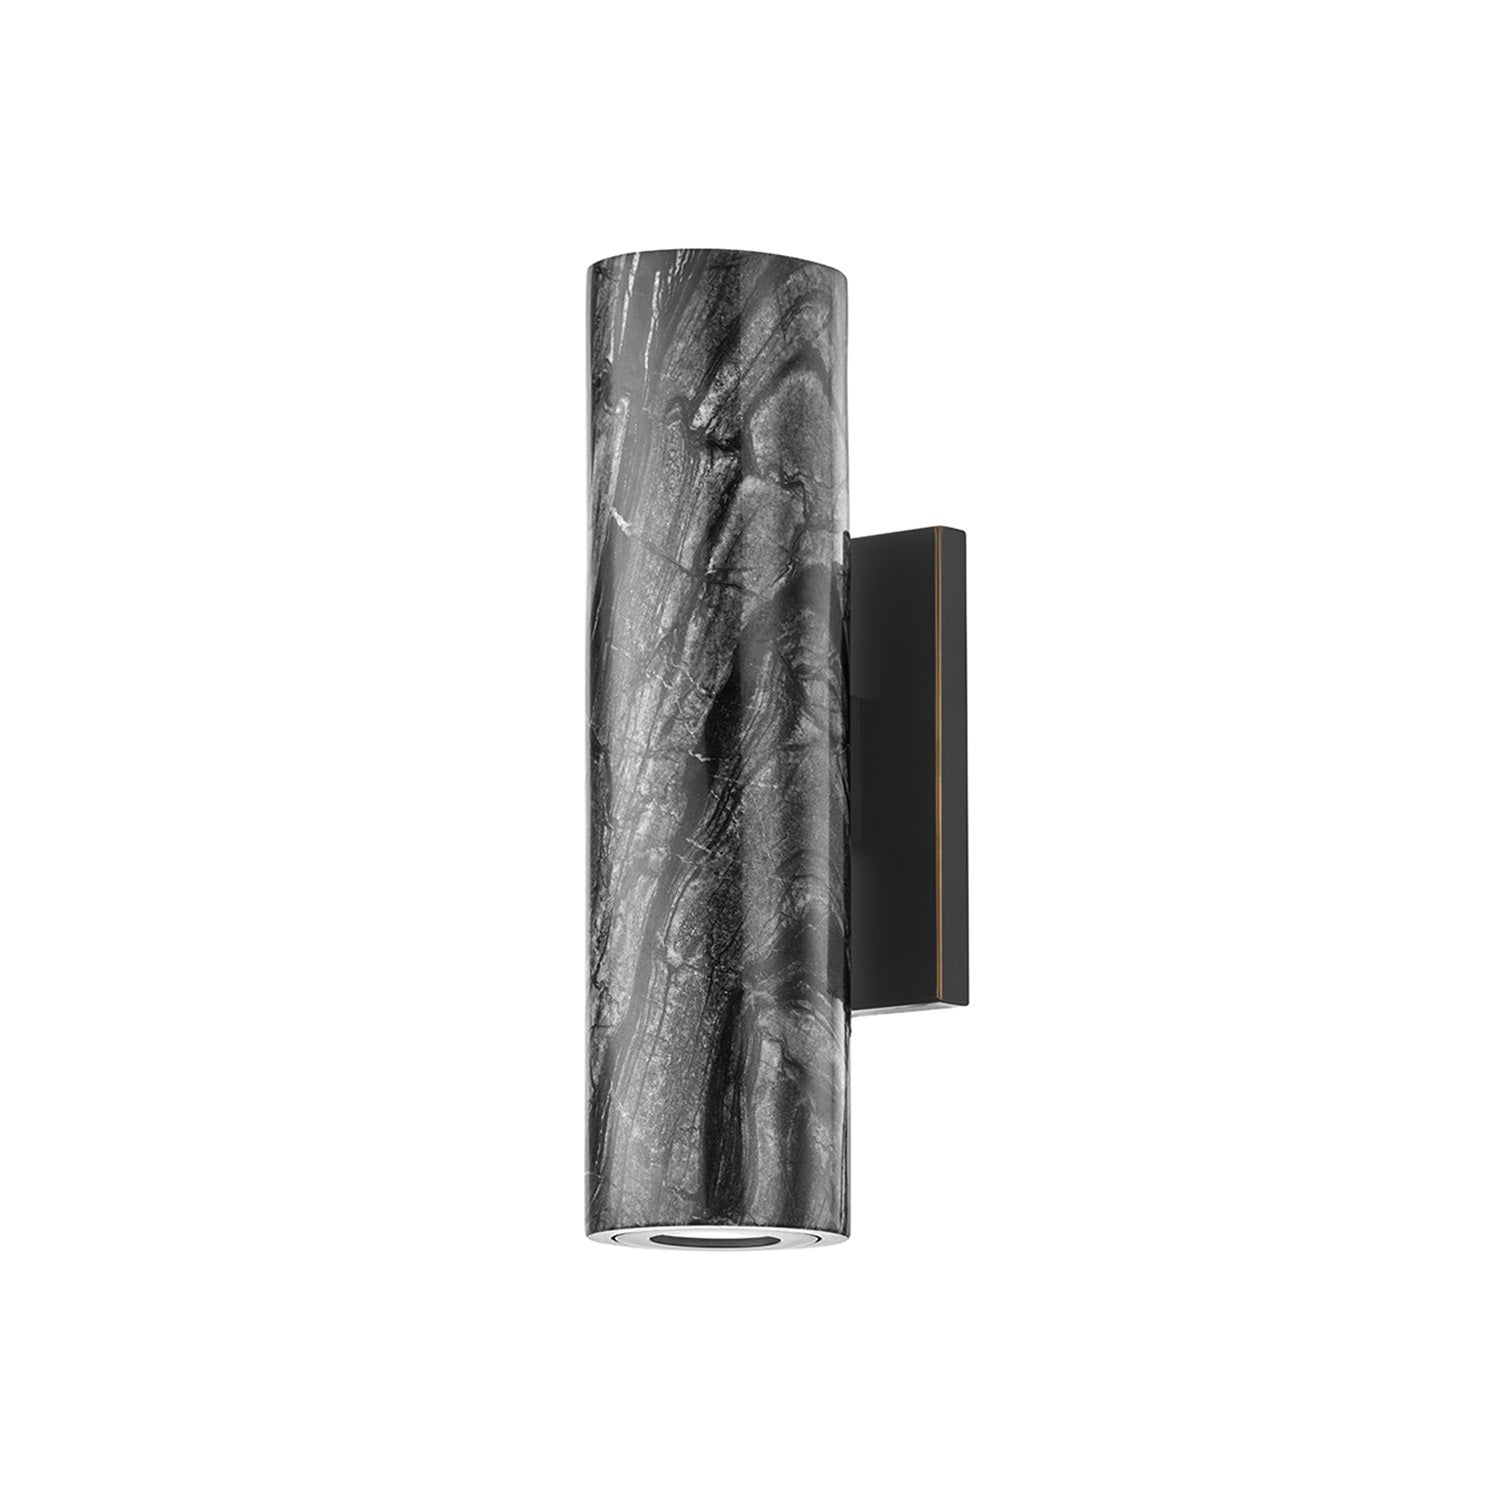 PREDOCK - Black marble wall light for contemporary bedroom